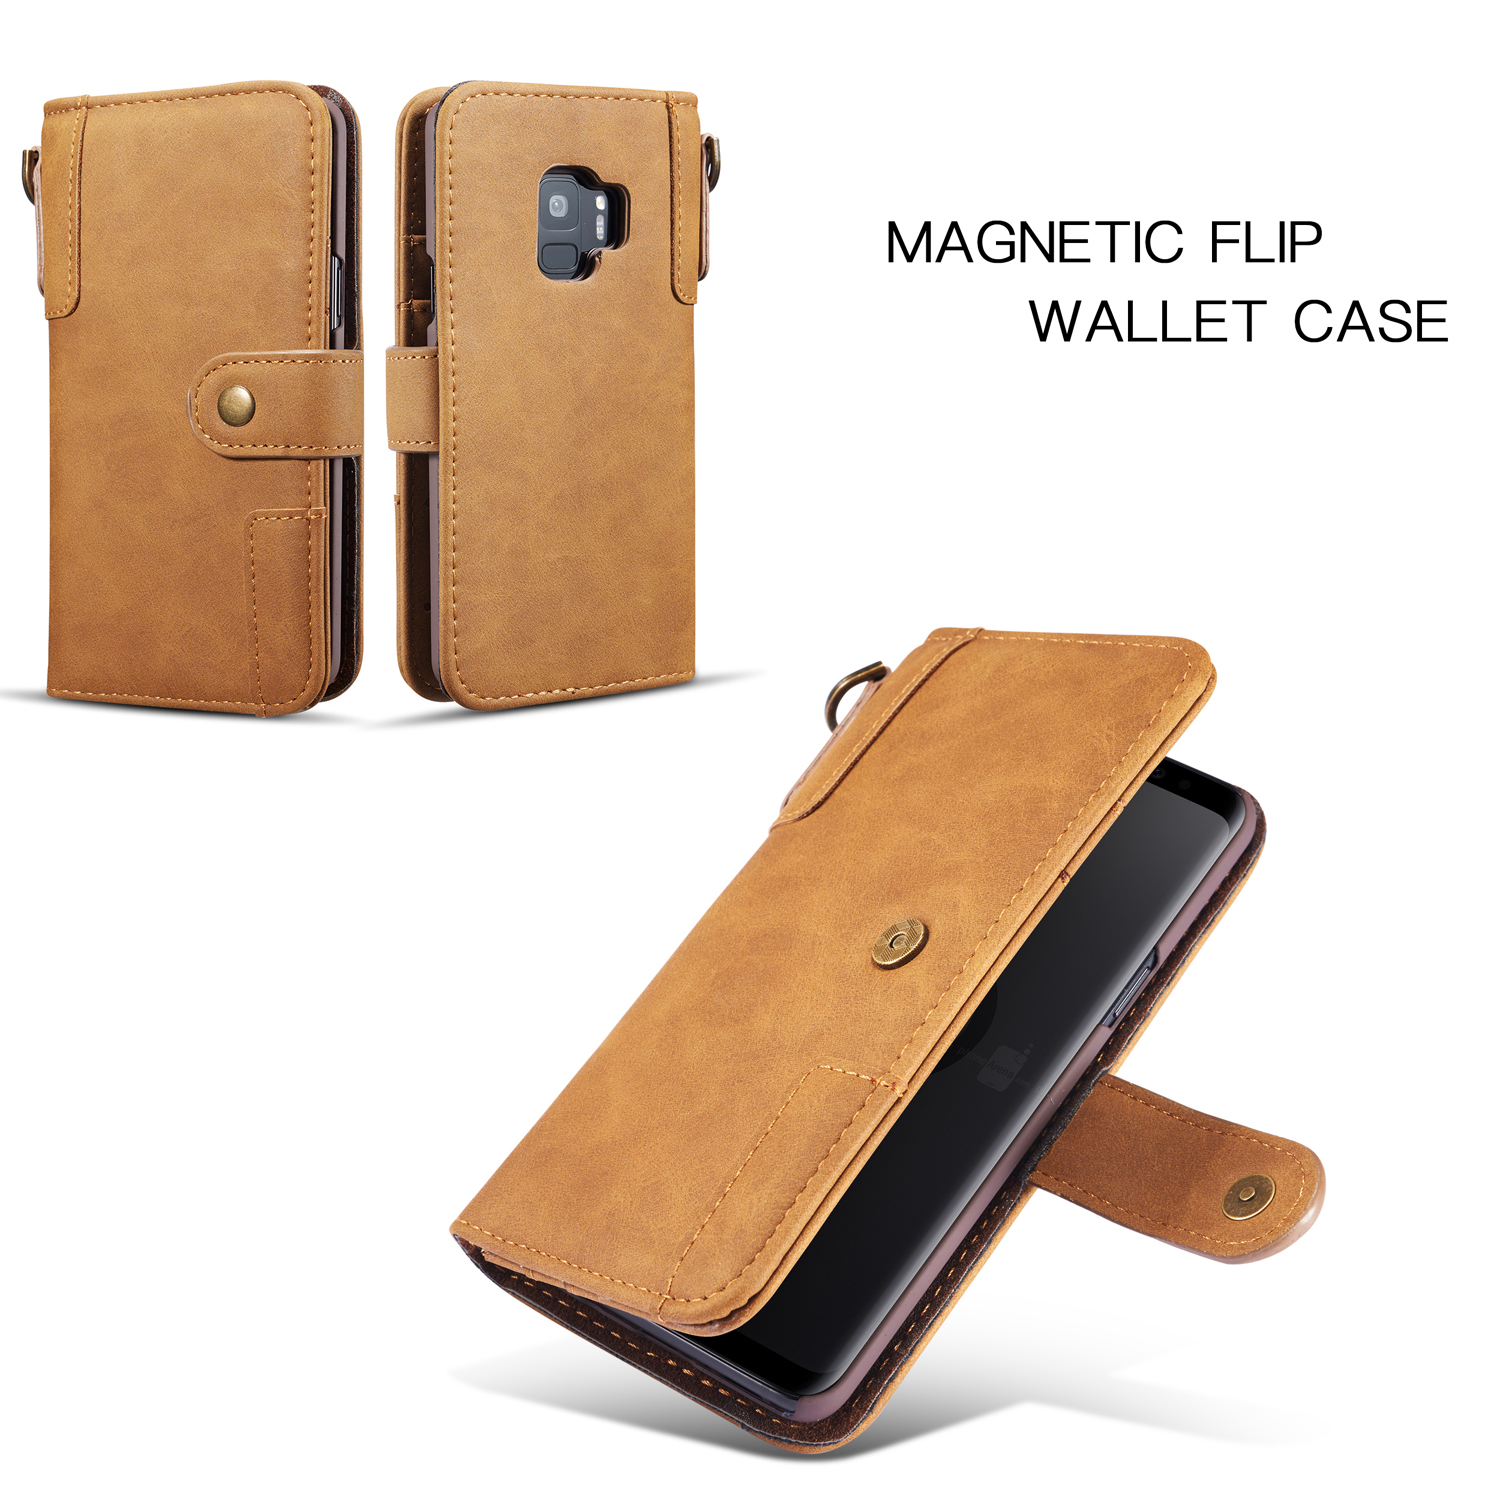 Bakeey-Genuine-Cowhide-Leather-Magnetic-Flip-Wallet-Kickstand-Protective-Case-For-Samsung-Galaxy-S9S-1280143-1